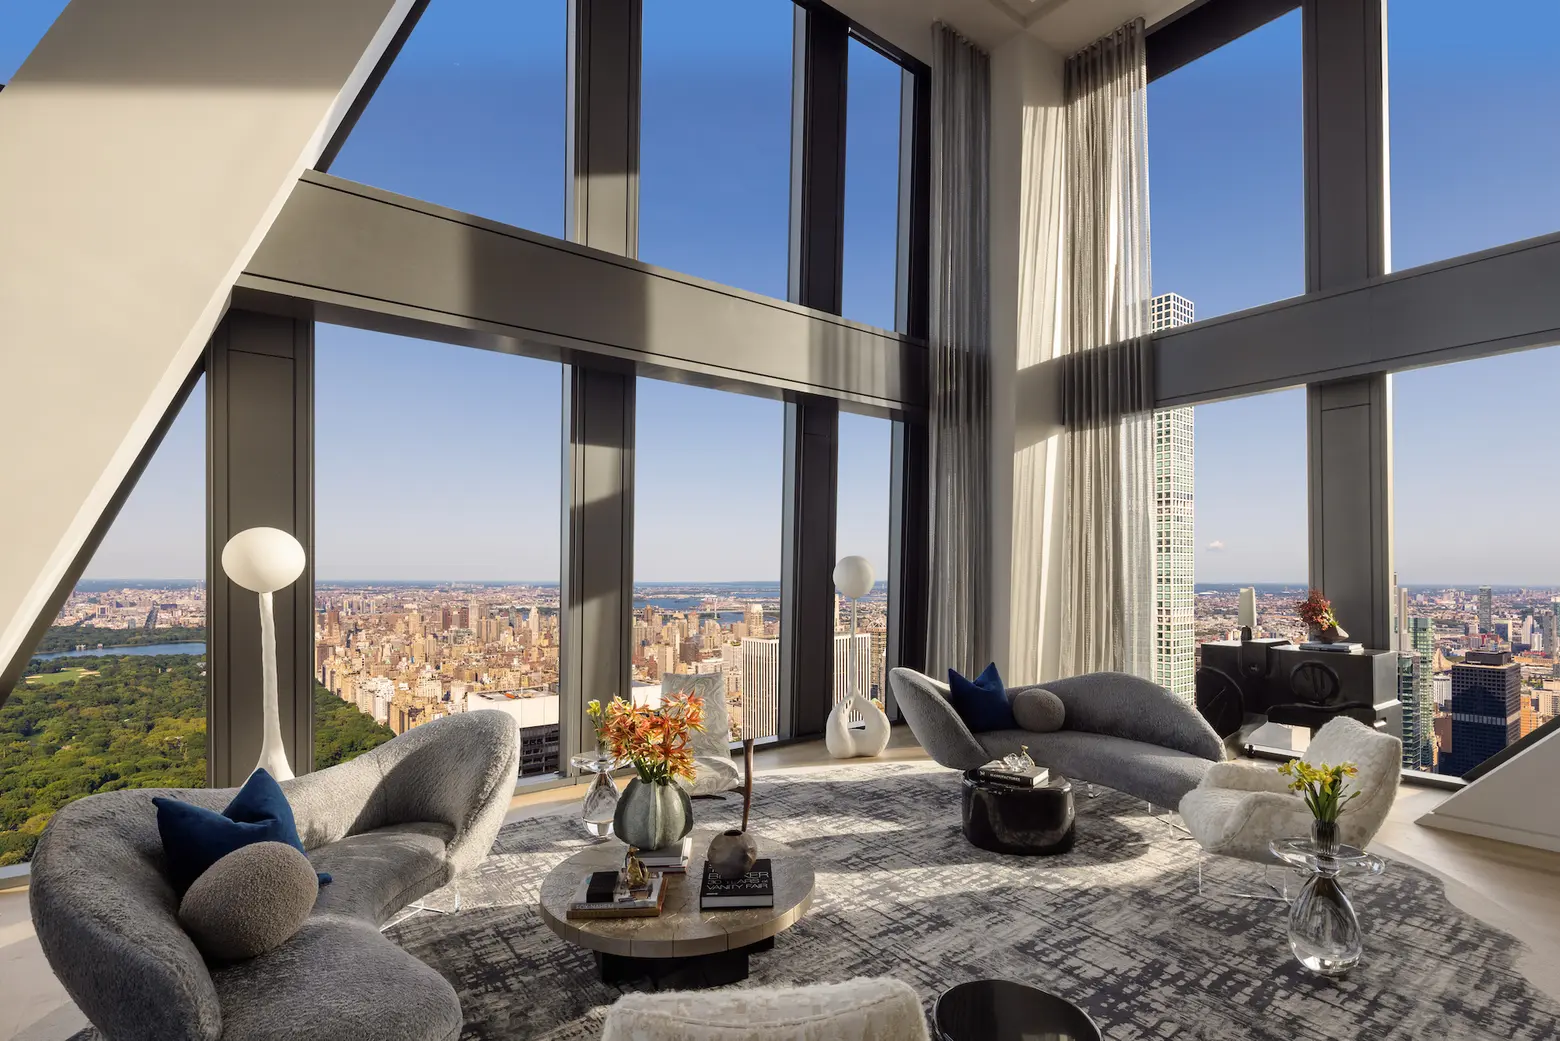 Take a tour of a duplex penthouse at Jean Nouvel’s tower above MoMA